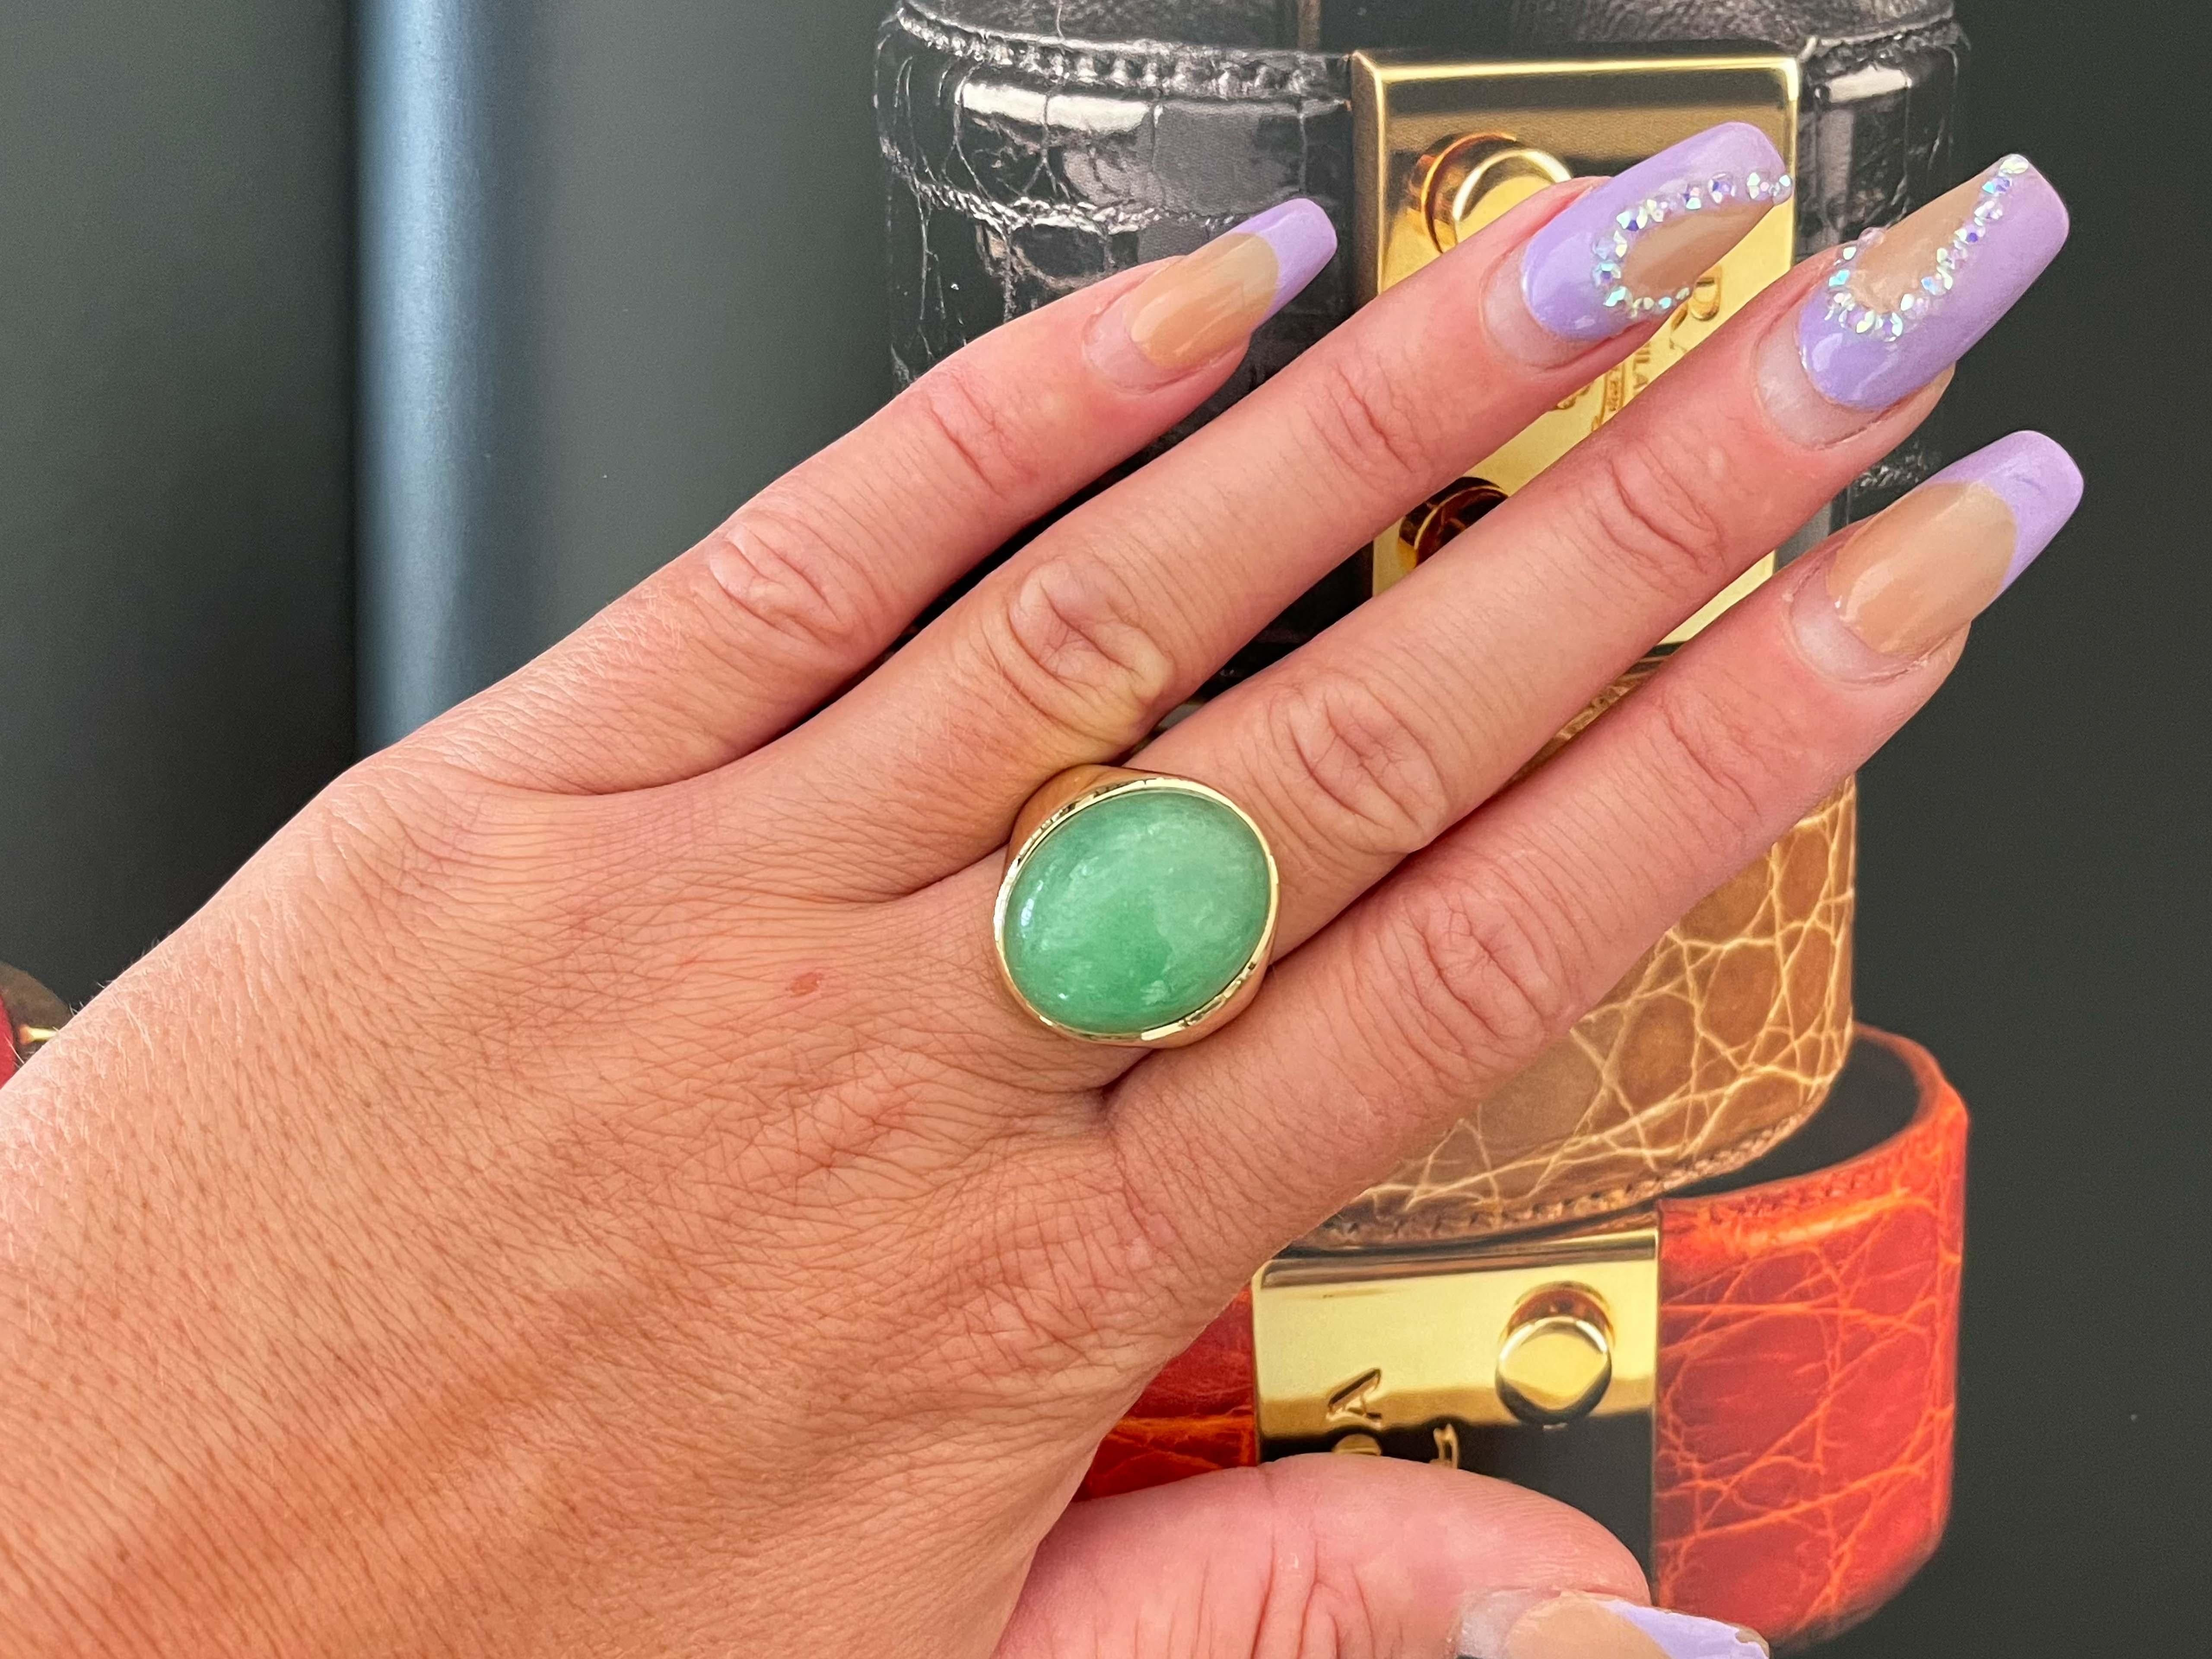 Magnificent vintage large oval cabochon green jadeite jade ring, in 14k yellow gold. The beautiful apple green Jade is bezel set and measures approximately 20.52 mm x 17.02 mm x 9.85 mm. The ring has a tapered shank with a high polish finish. The